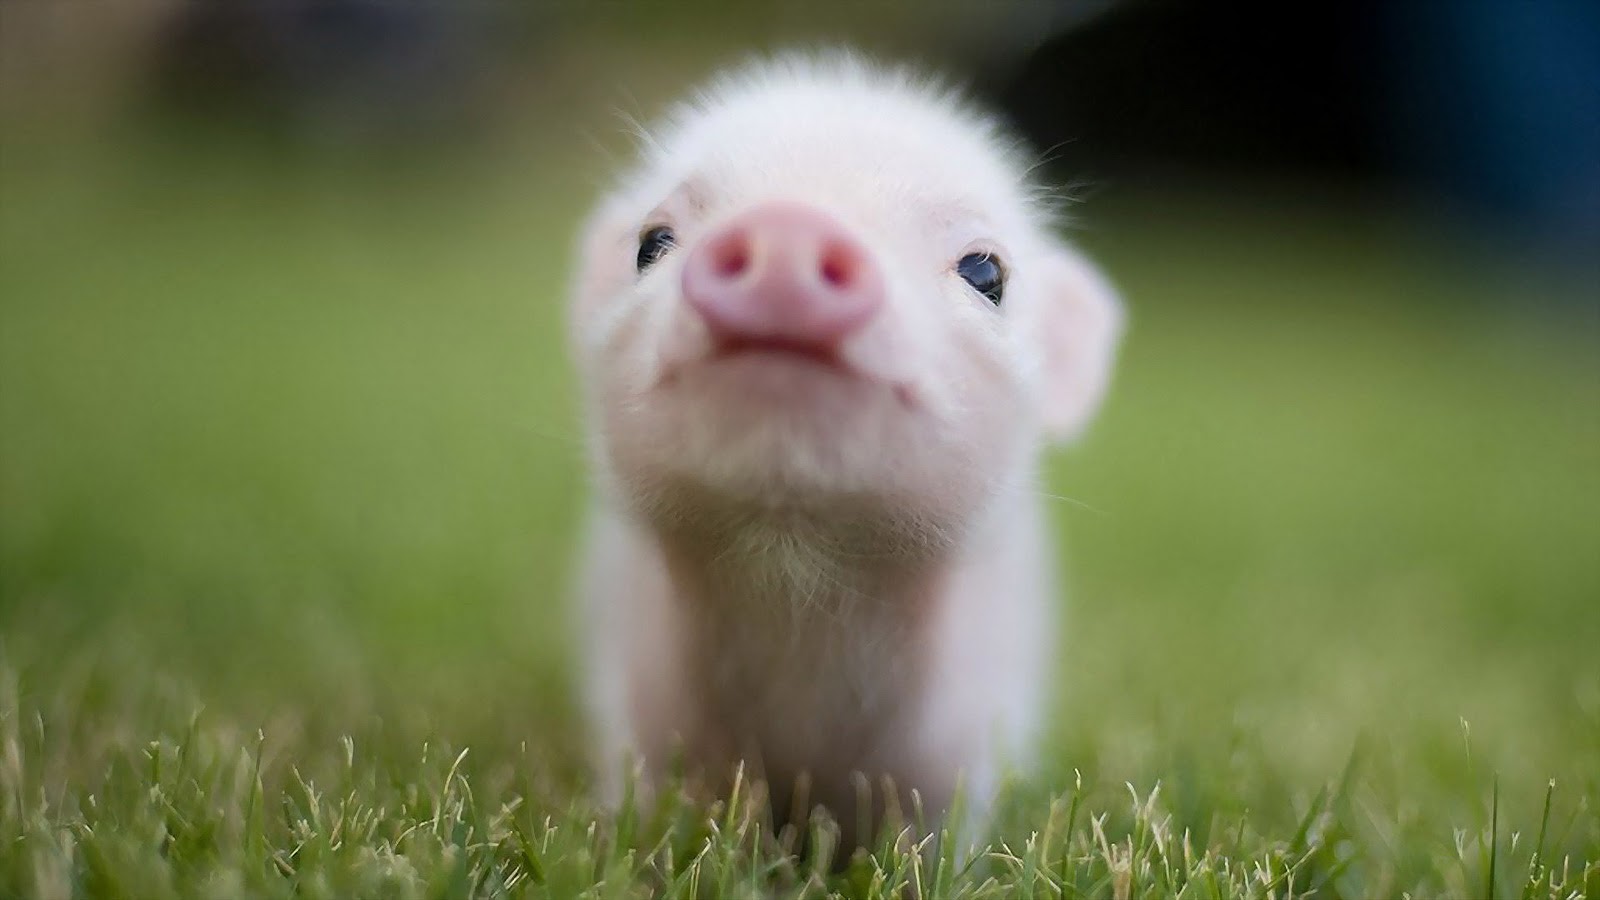 baby pig wallpaper,domestic pig,nose,grass,snout,skin